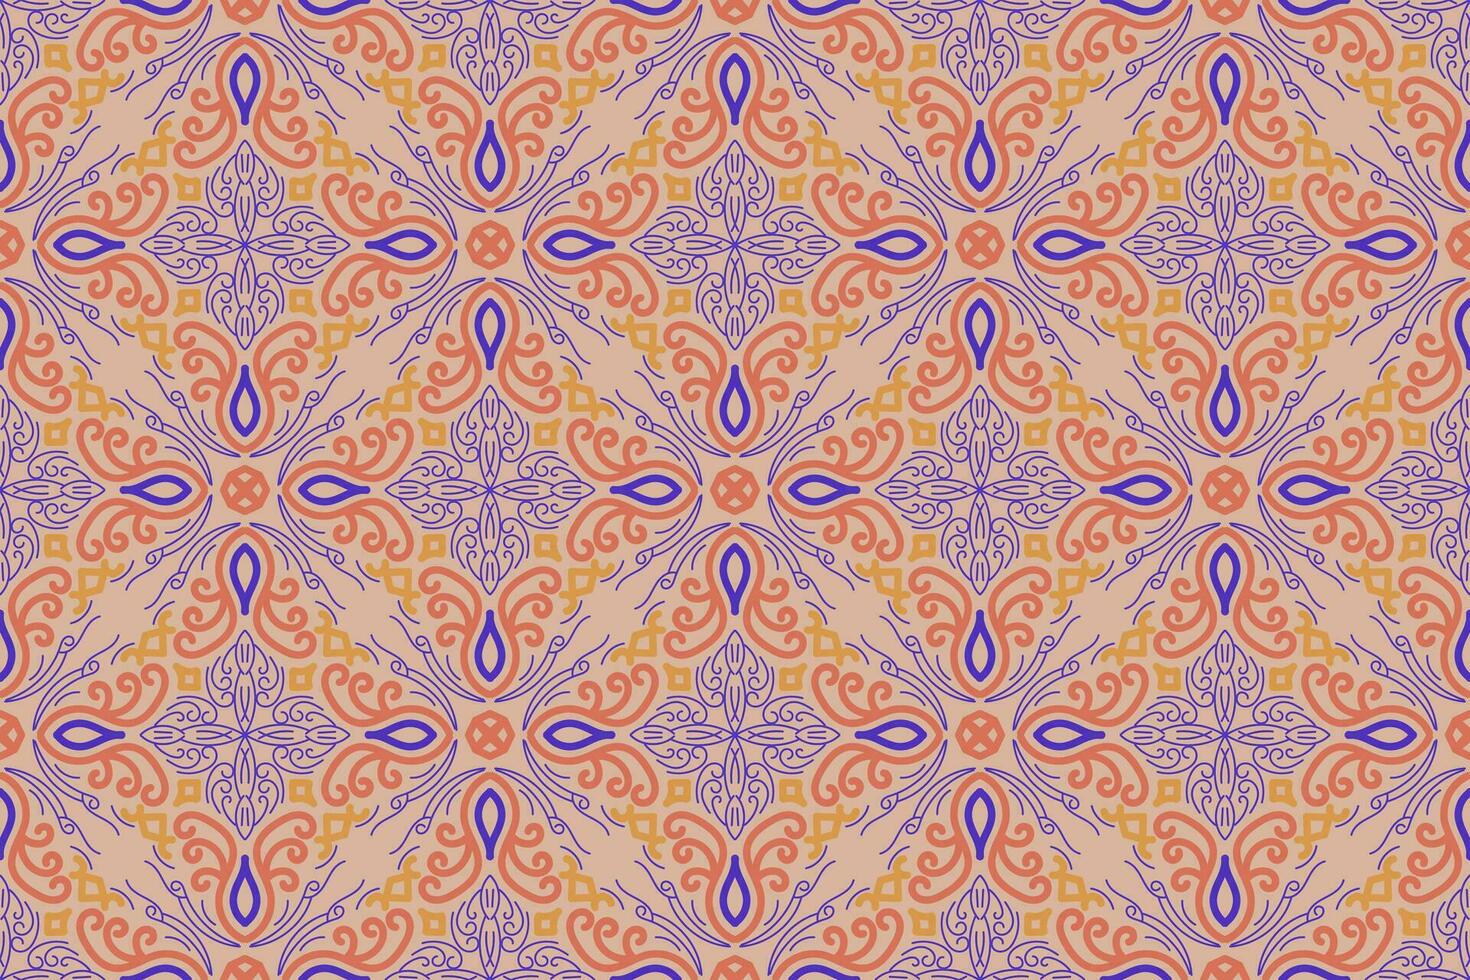 oriental pattern. orange and blue background with Arabic ornaments. Patterns, background and wallpaper for your design. Textile ornament. Vector illustration.